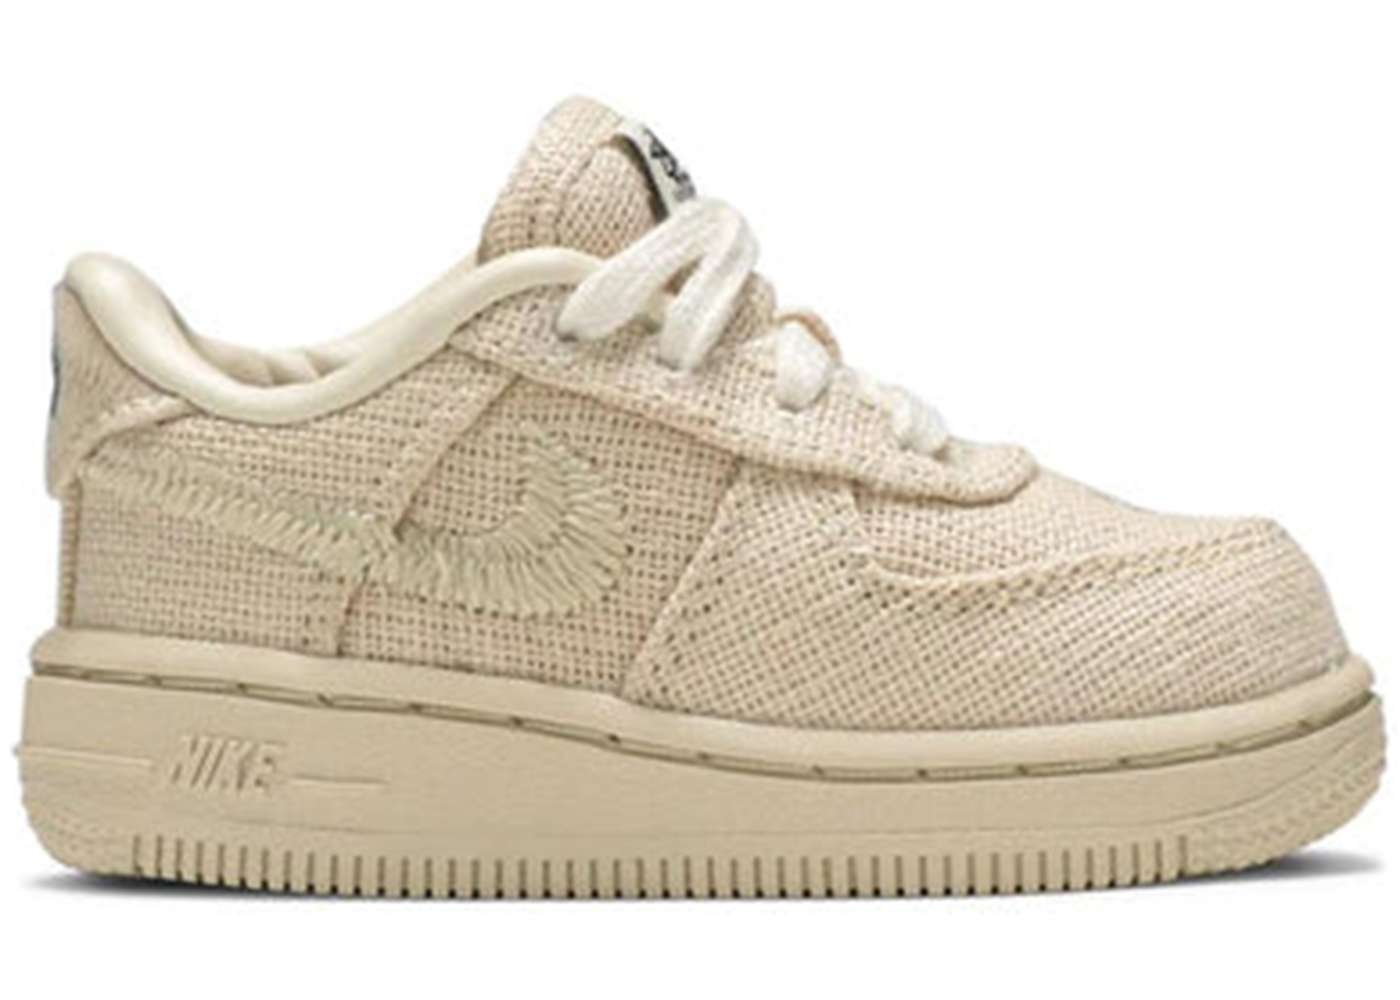 Nike Air Force 1 Low Stussy Fossil (TD) Toddler - DC8306-200 - US